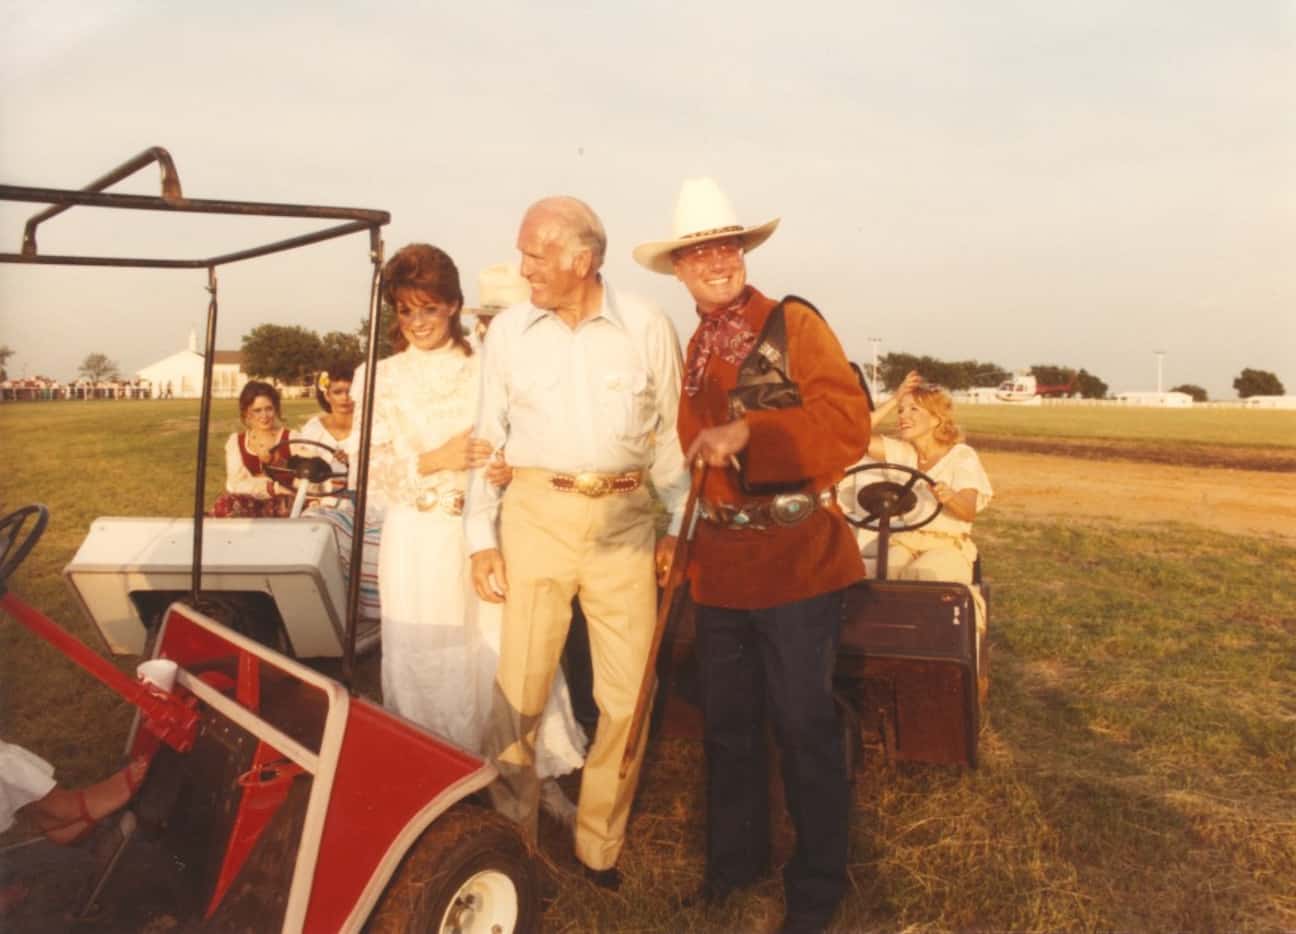 Dallas TV stars Linda Gray and Larry Hagman with businessman Cloyce Box at the 1982 Cattle...